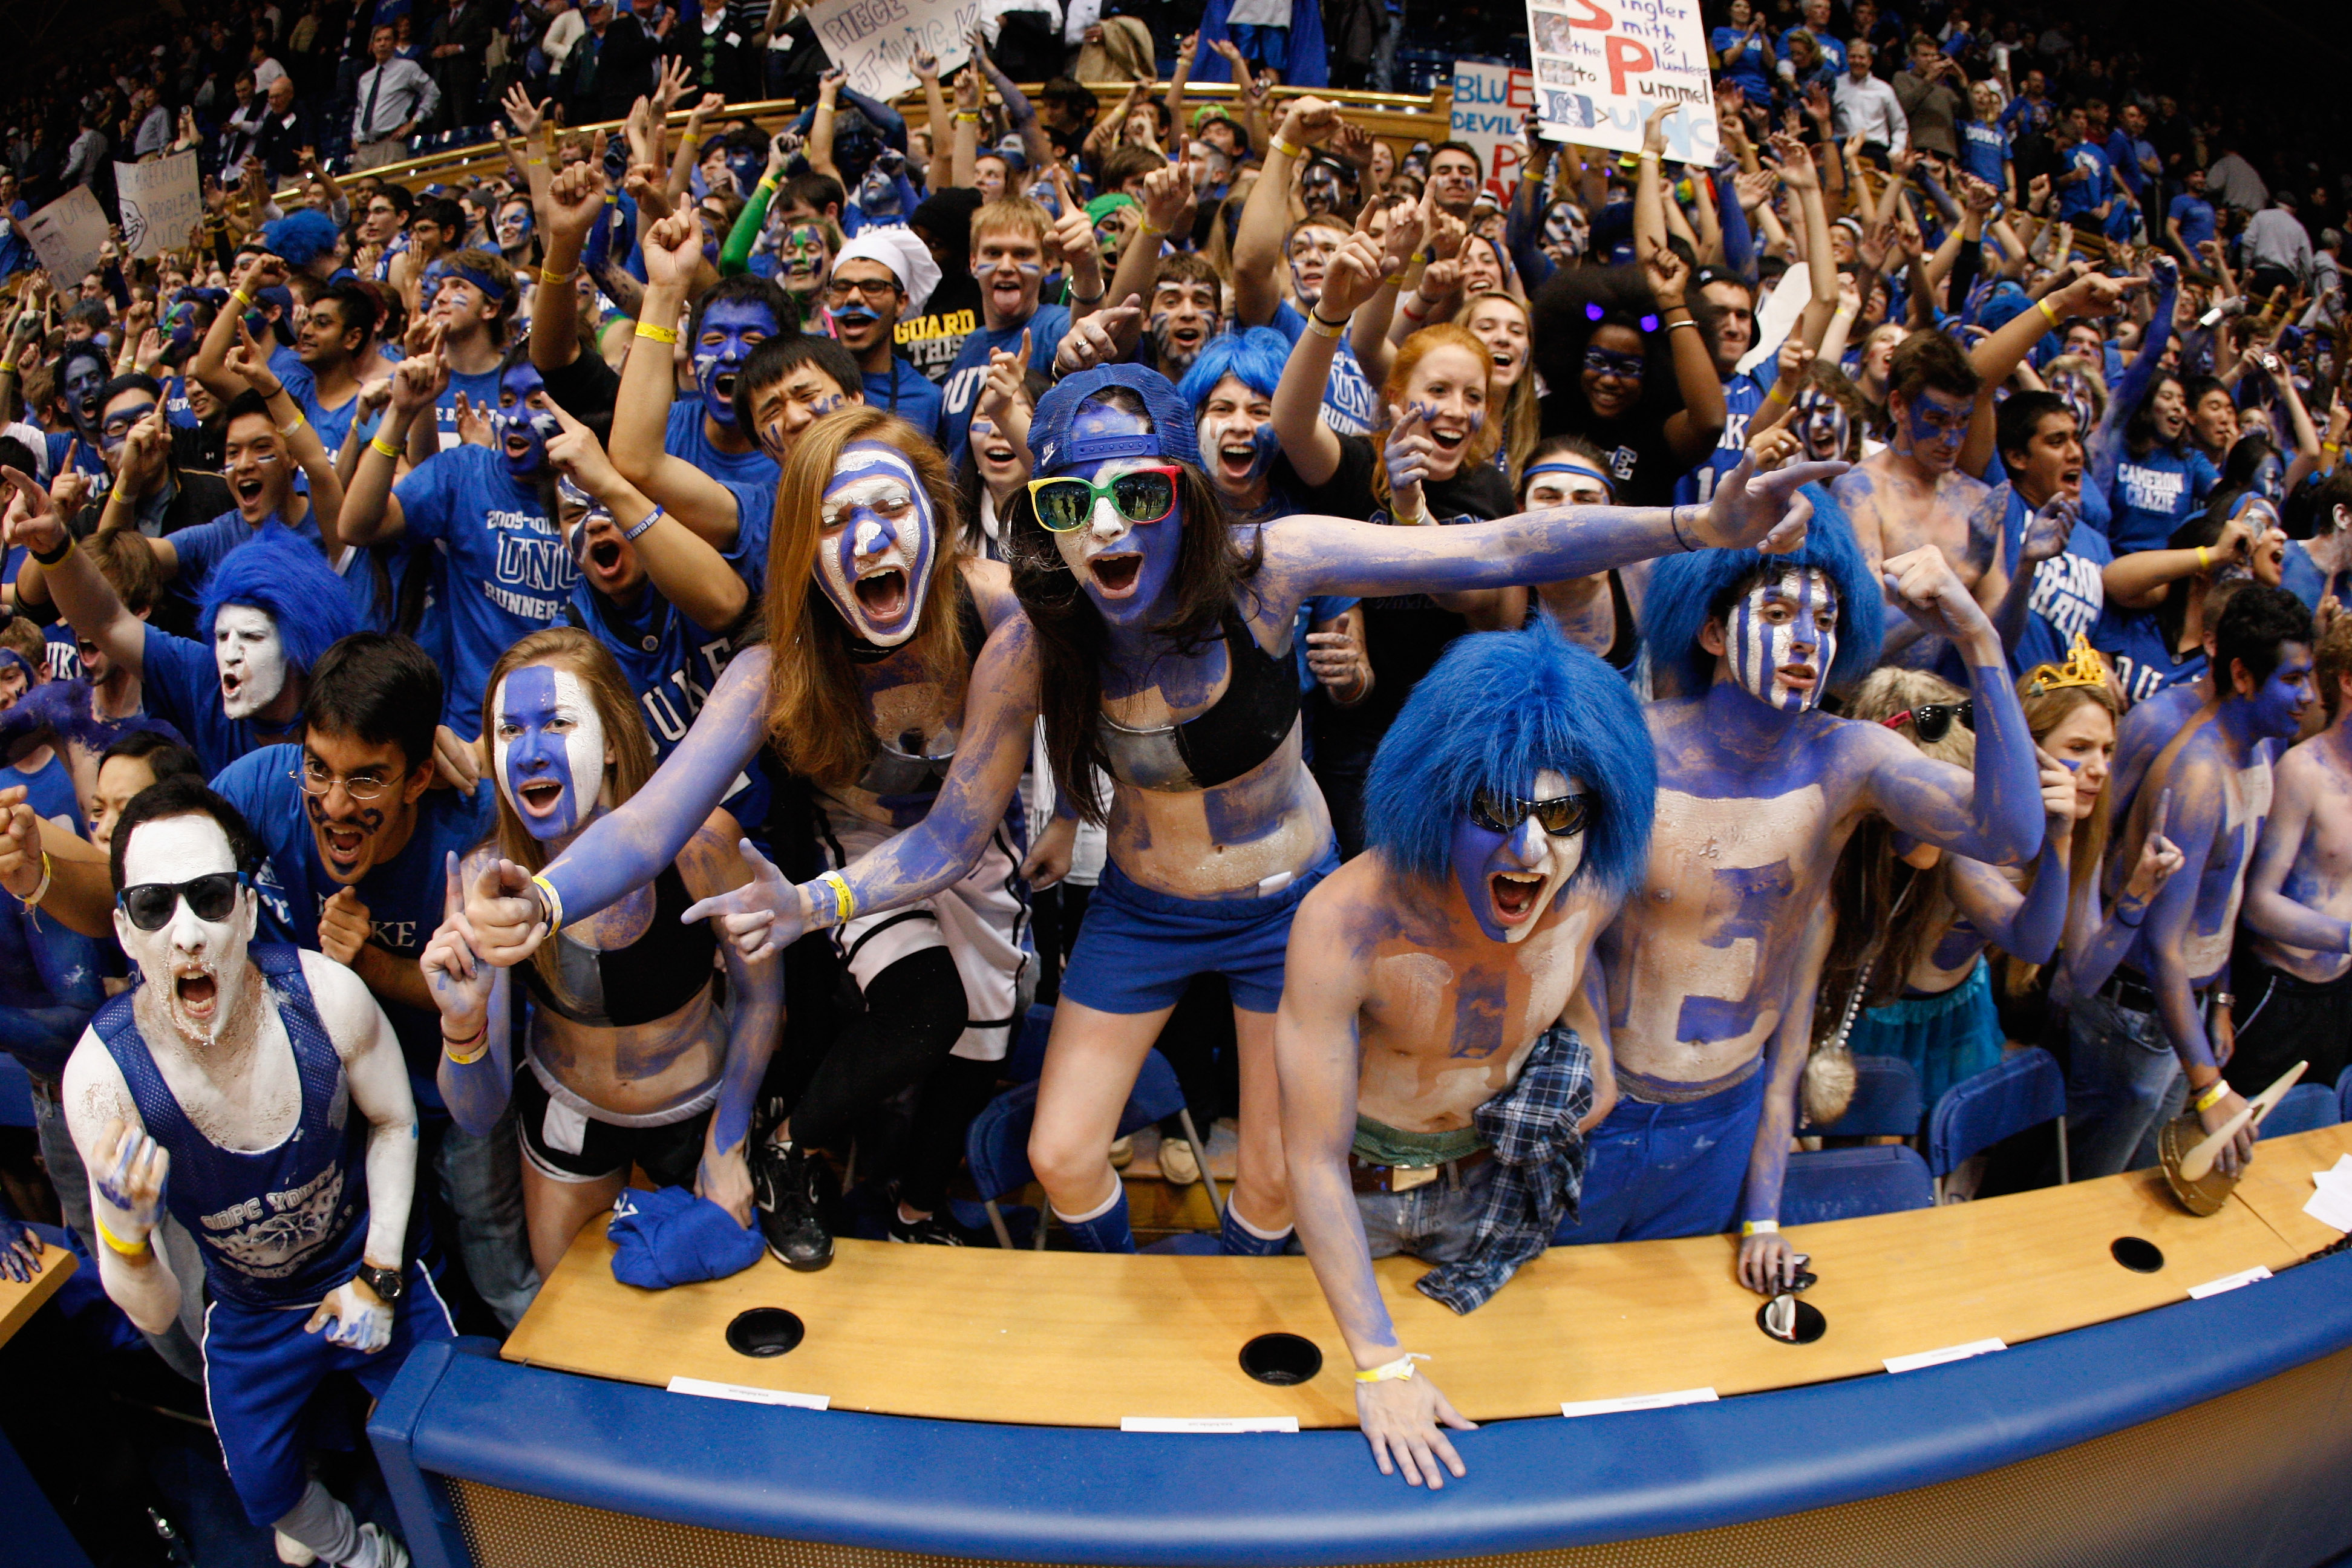 DURHAM, NC - FEBRUARY 09:  Cameron Crazies celebrate after defeating the North Carolina Tar Heels 79-73 at Cameron Indoor Stadium on February 9, 2011 in Durham, North Carolina.  (Photo by Streeter Lecka/Getty Images)